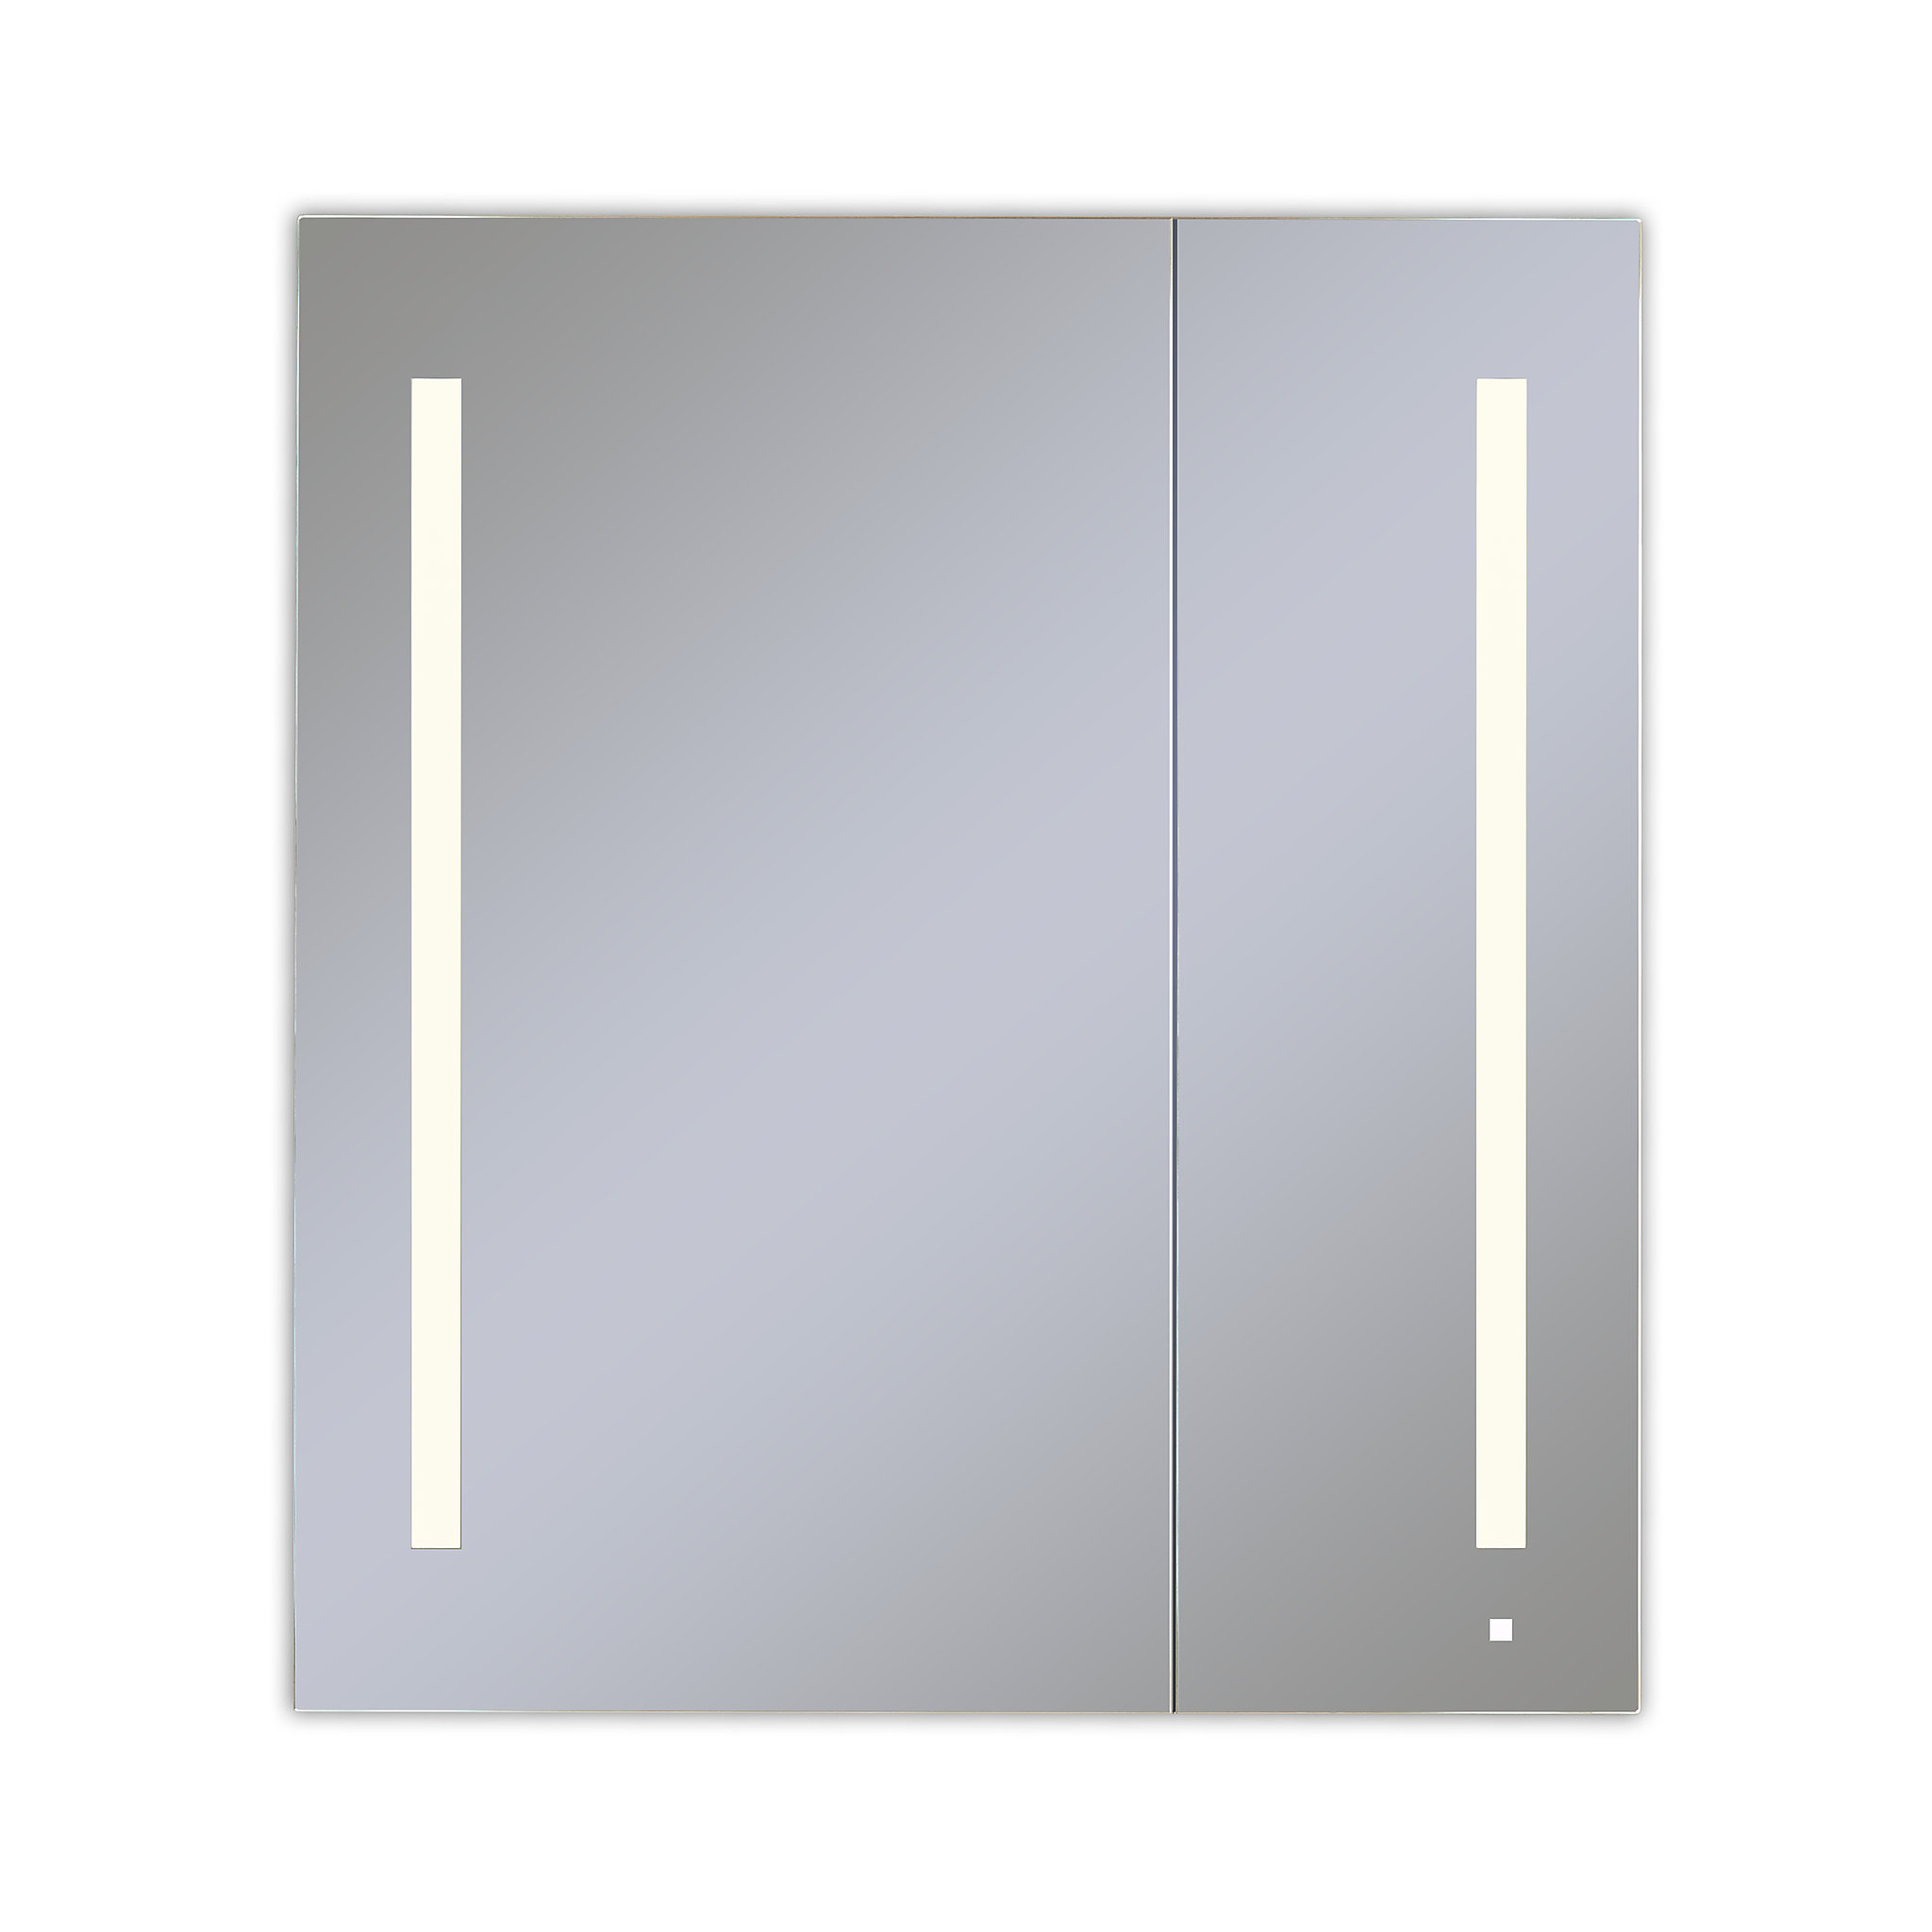 Robern AC3640D4P2LAW AiO Lighted Cabinet, 36" x 40" x 4", Two Door, LUM Lighting, 2700K Temperature (Warm Light), Dimmable, OM A